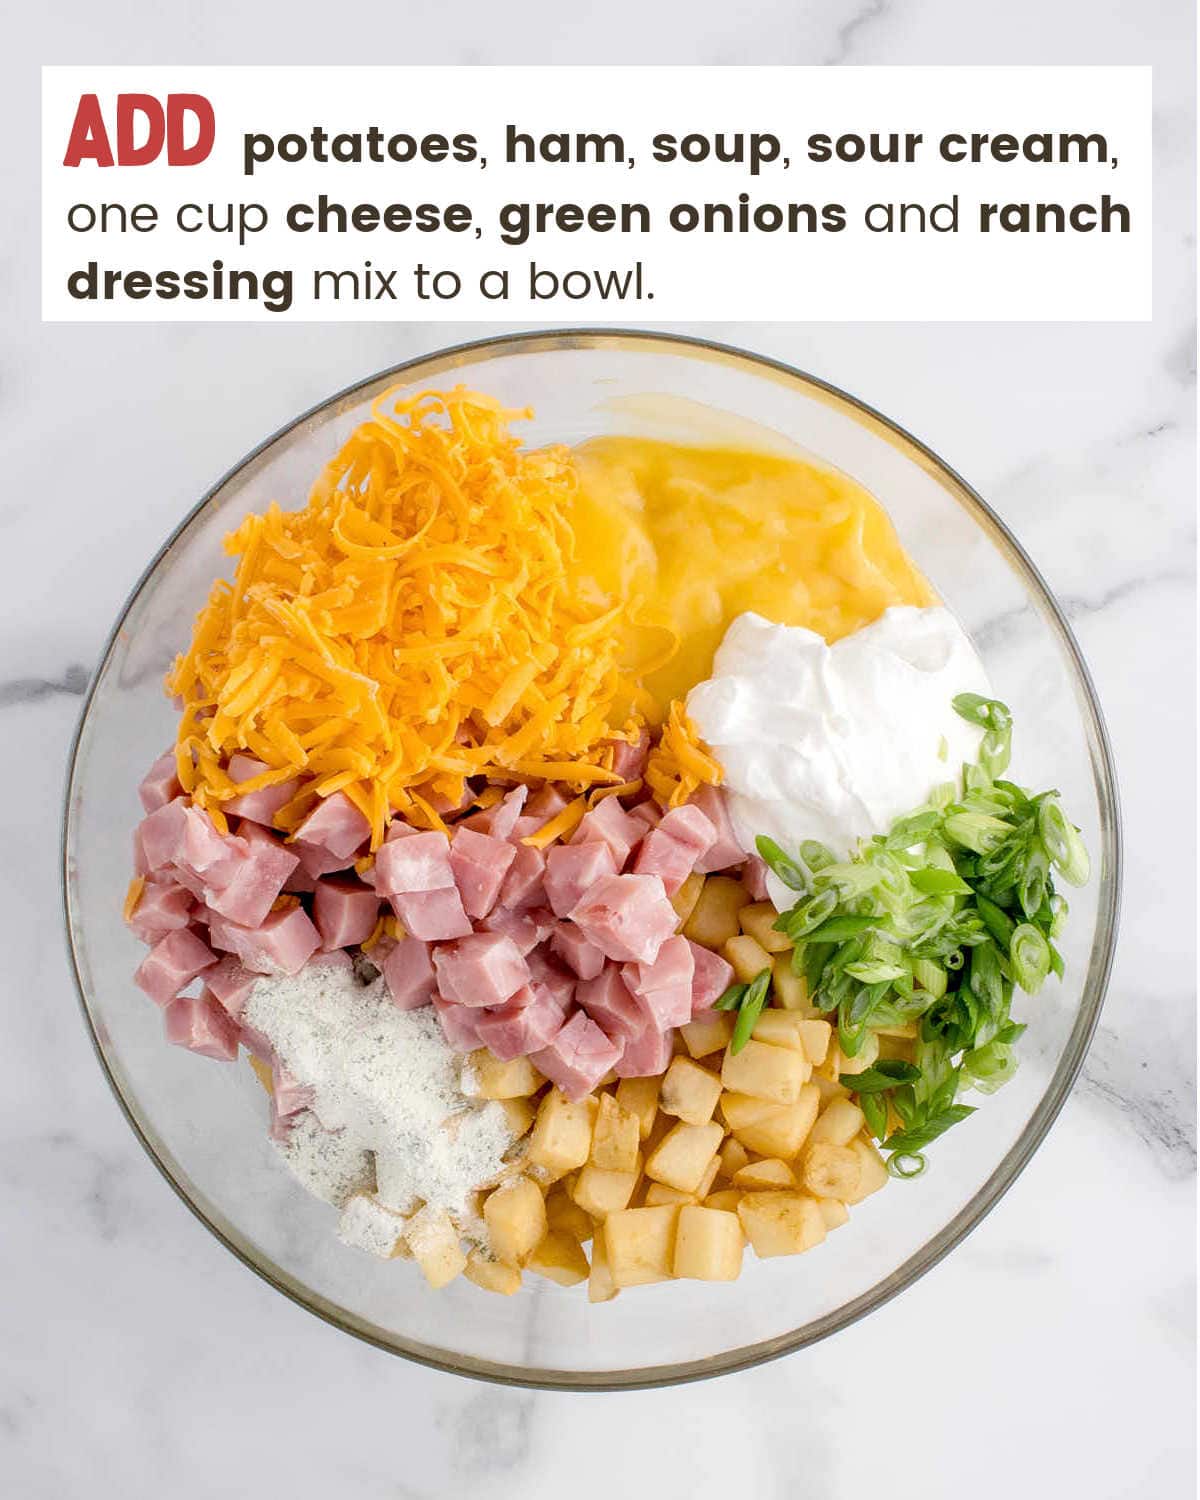 A bowl of ingredients for Ham and Potato Casserole